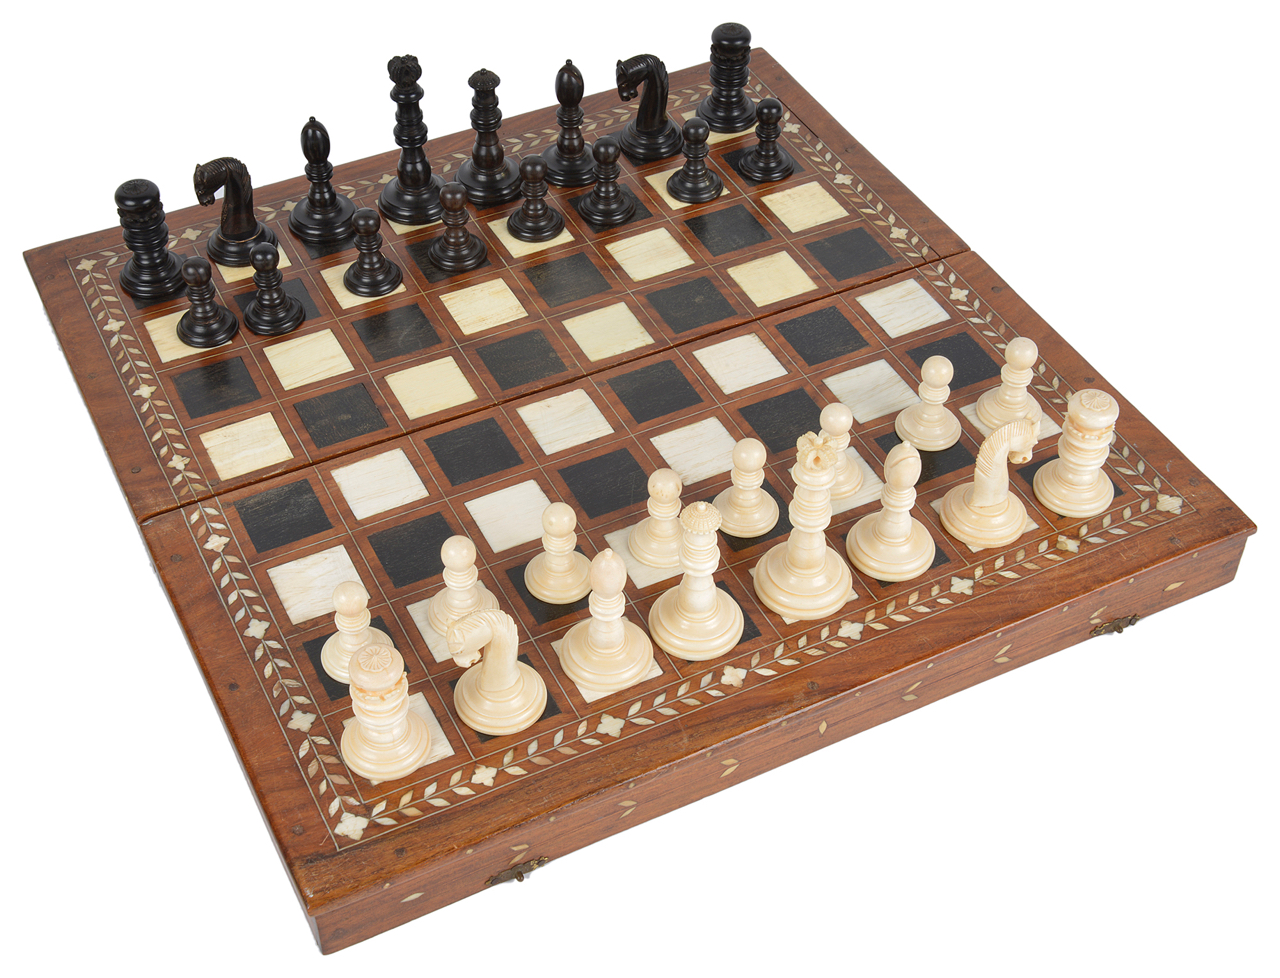 A late 19th/early 20th century coromandel and ivory chess set and later boardthe turned ivory and